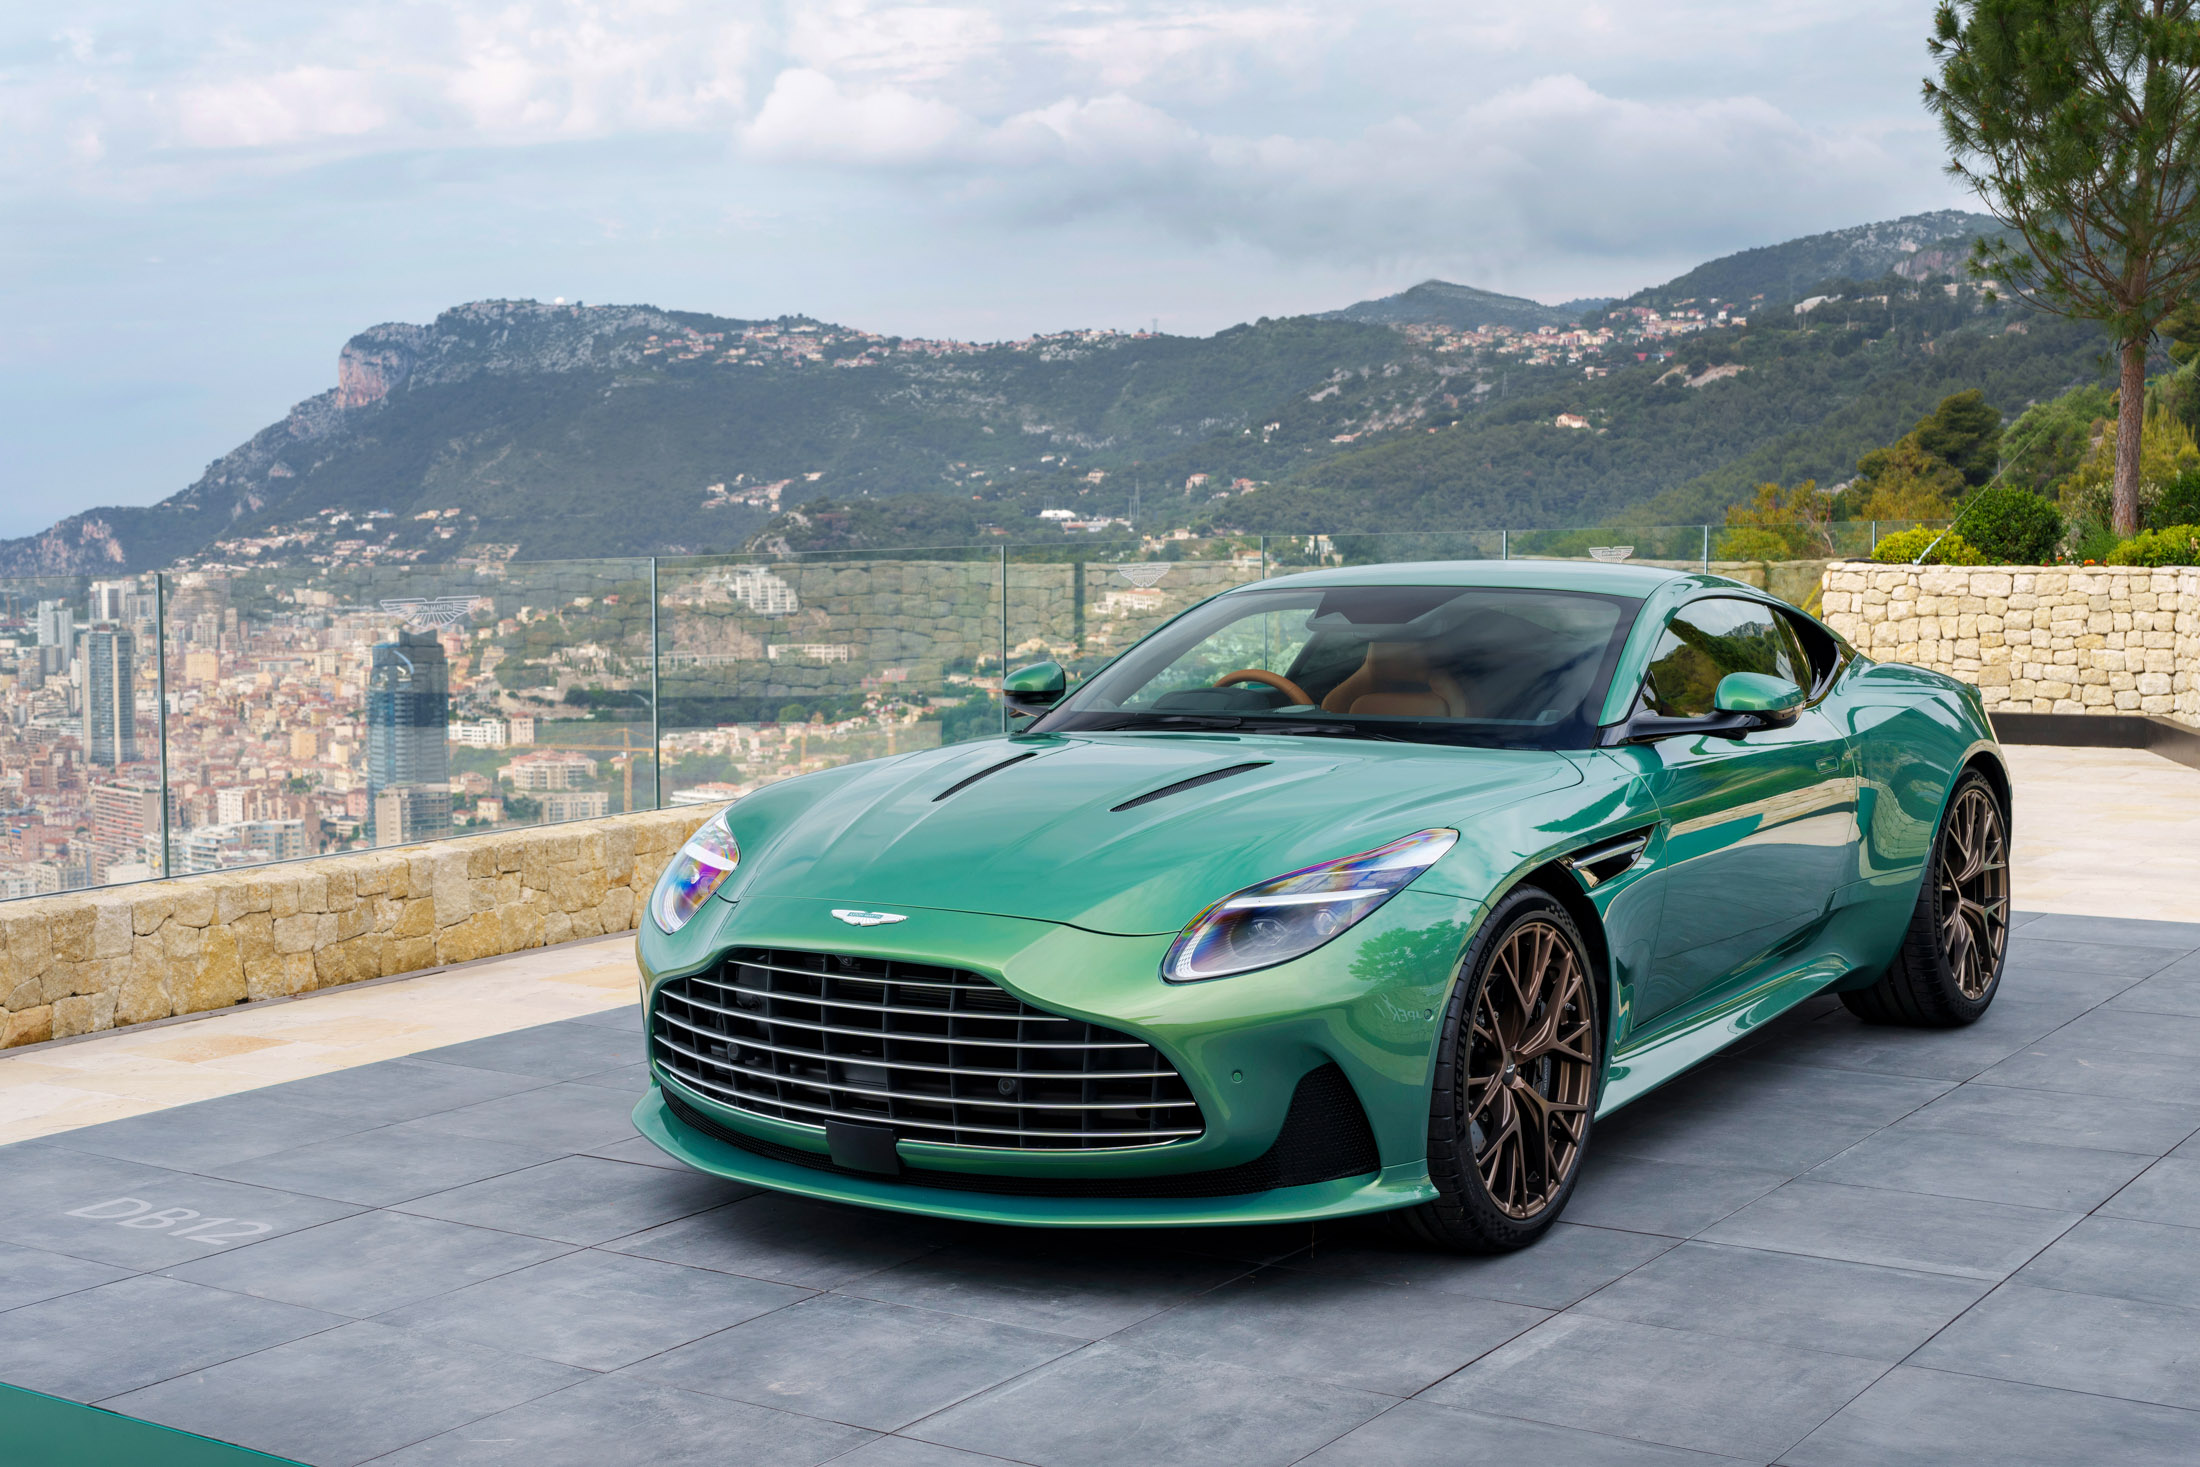 This Aston Martin for children might cost more than your real car